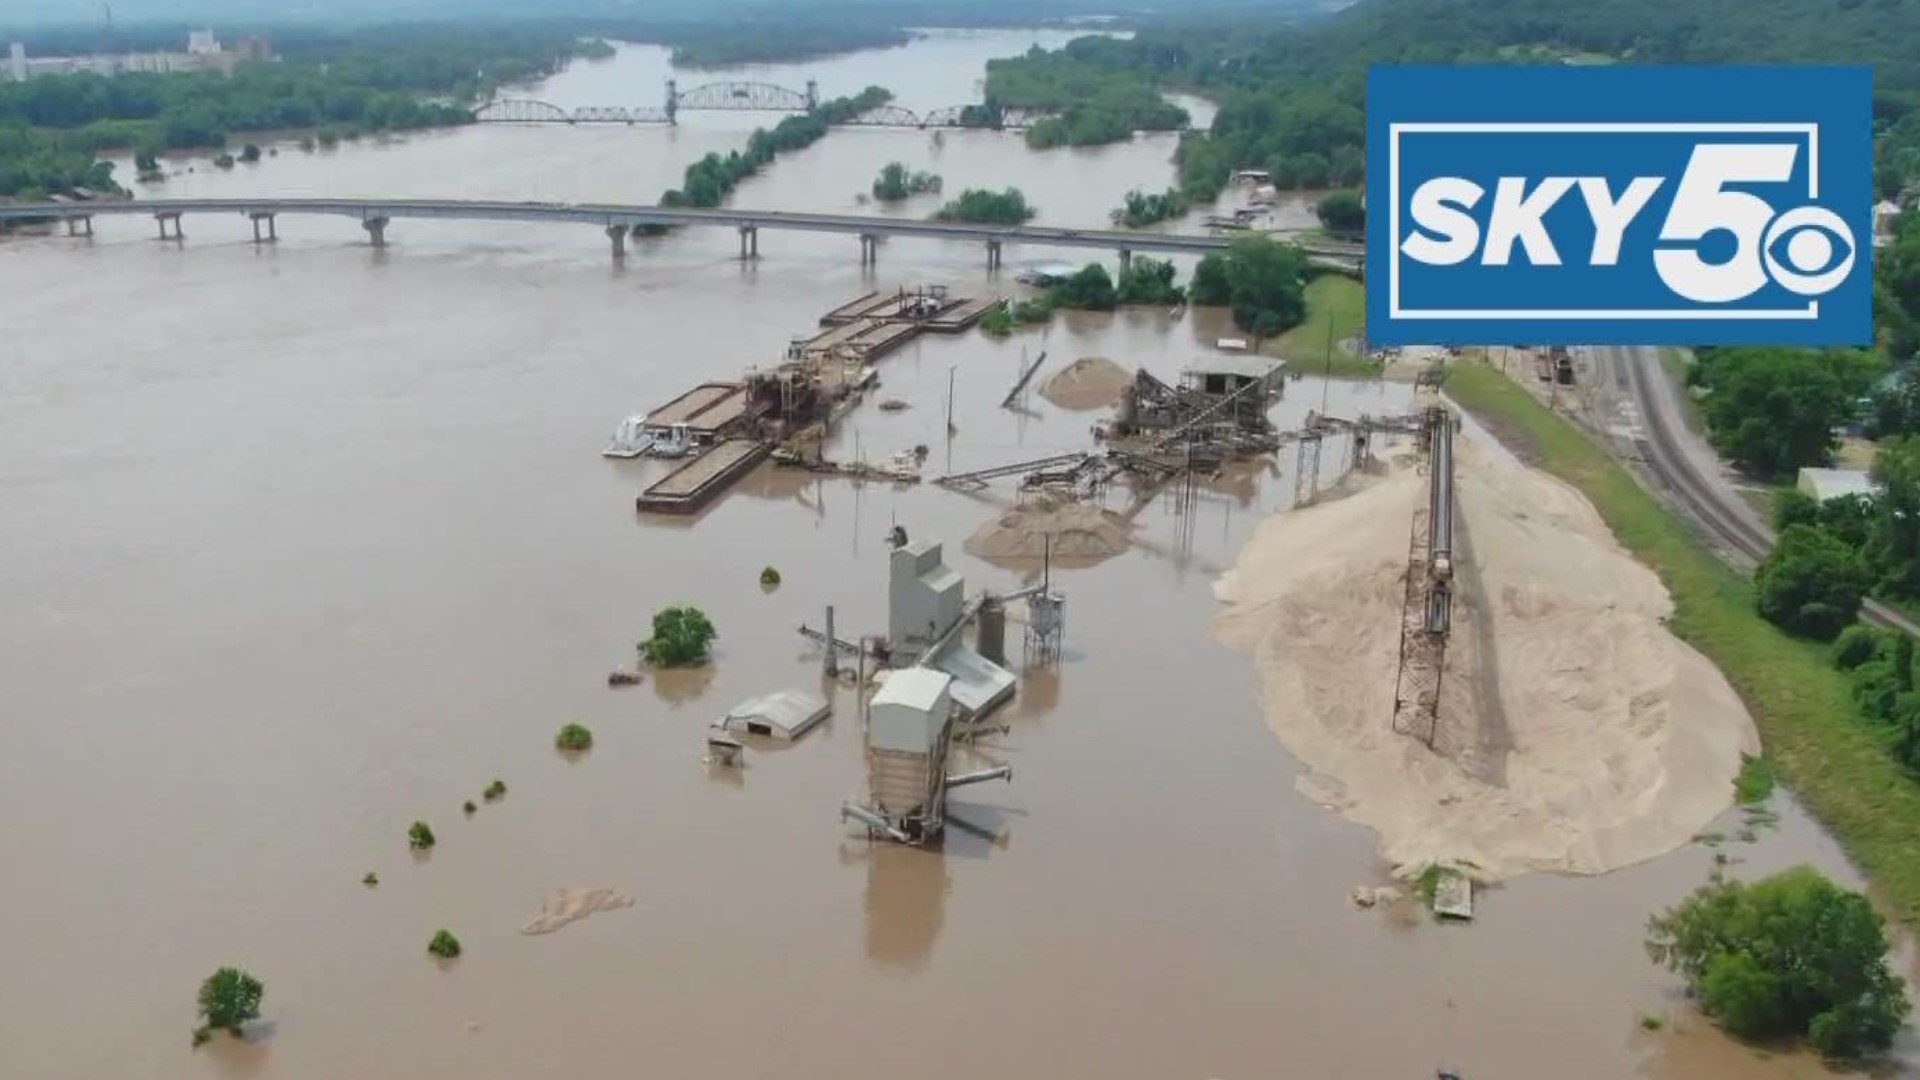 A sunny Memorial Day weekend in 2019 quickly turned into a nightmare as the Arkansas River rose to historic levels impacting the lives of hundreds.